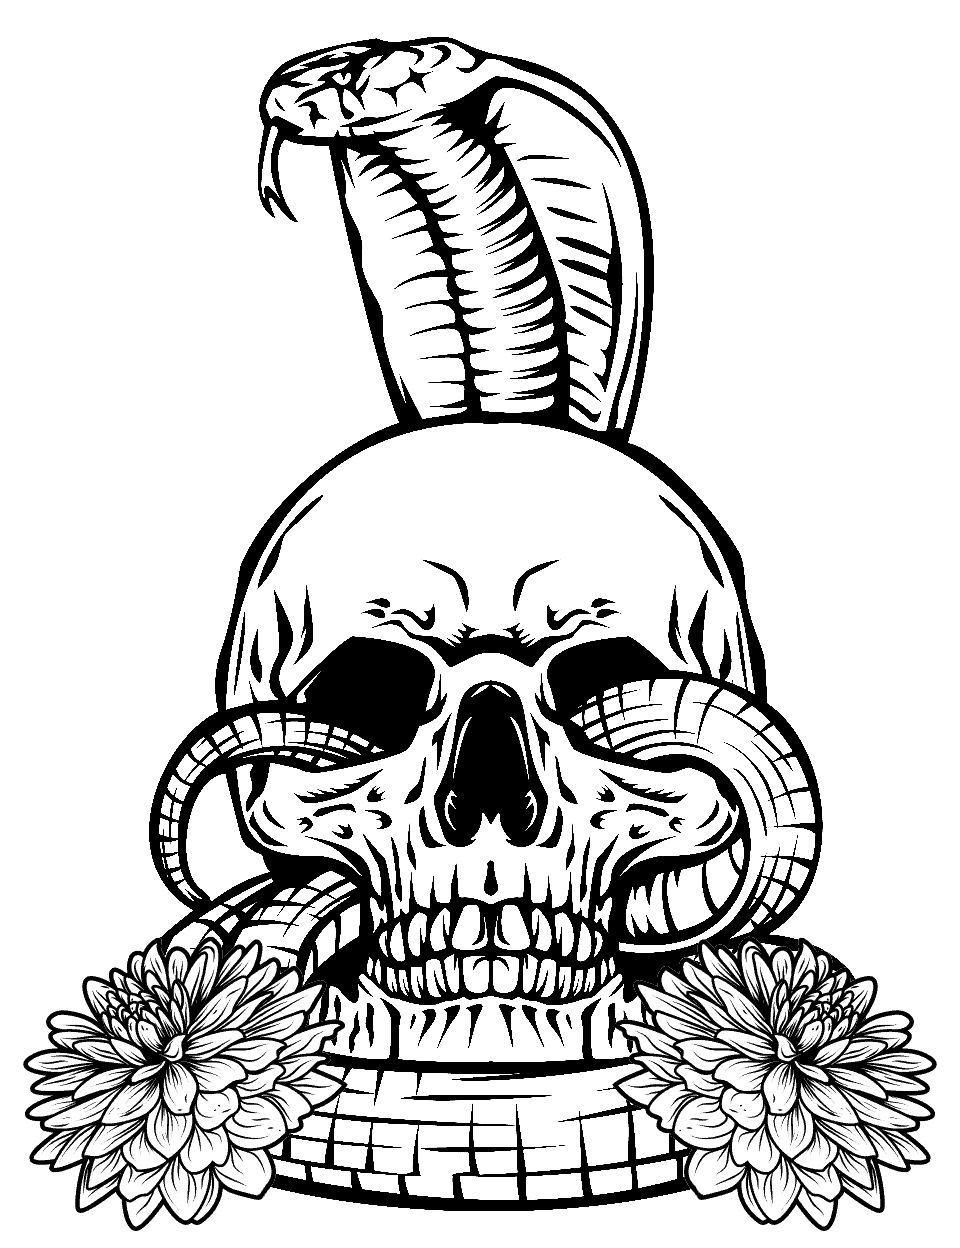 Skull and the Serpent Coloring Page - A snake slithering around a skull.